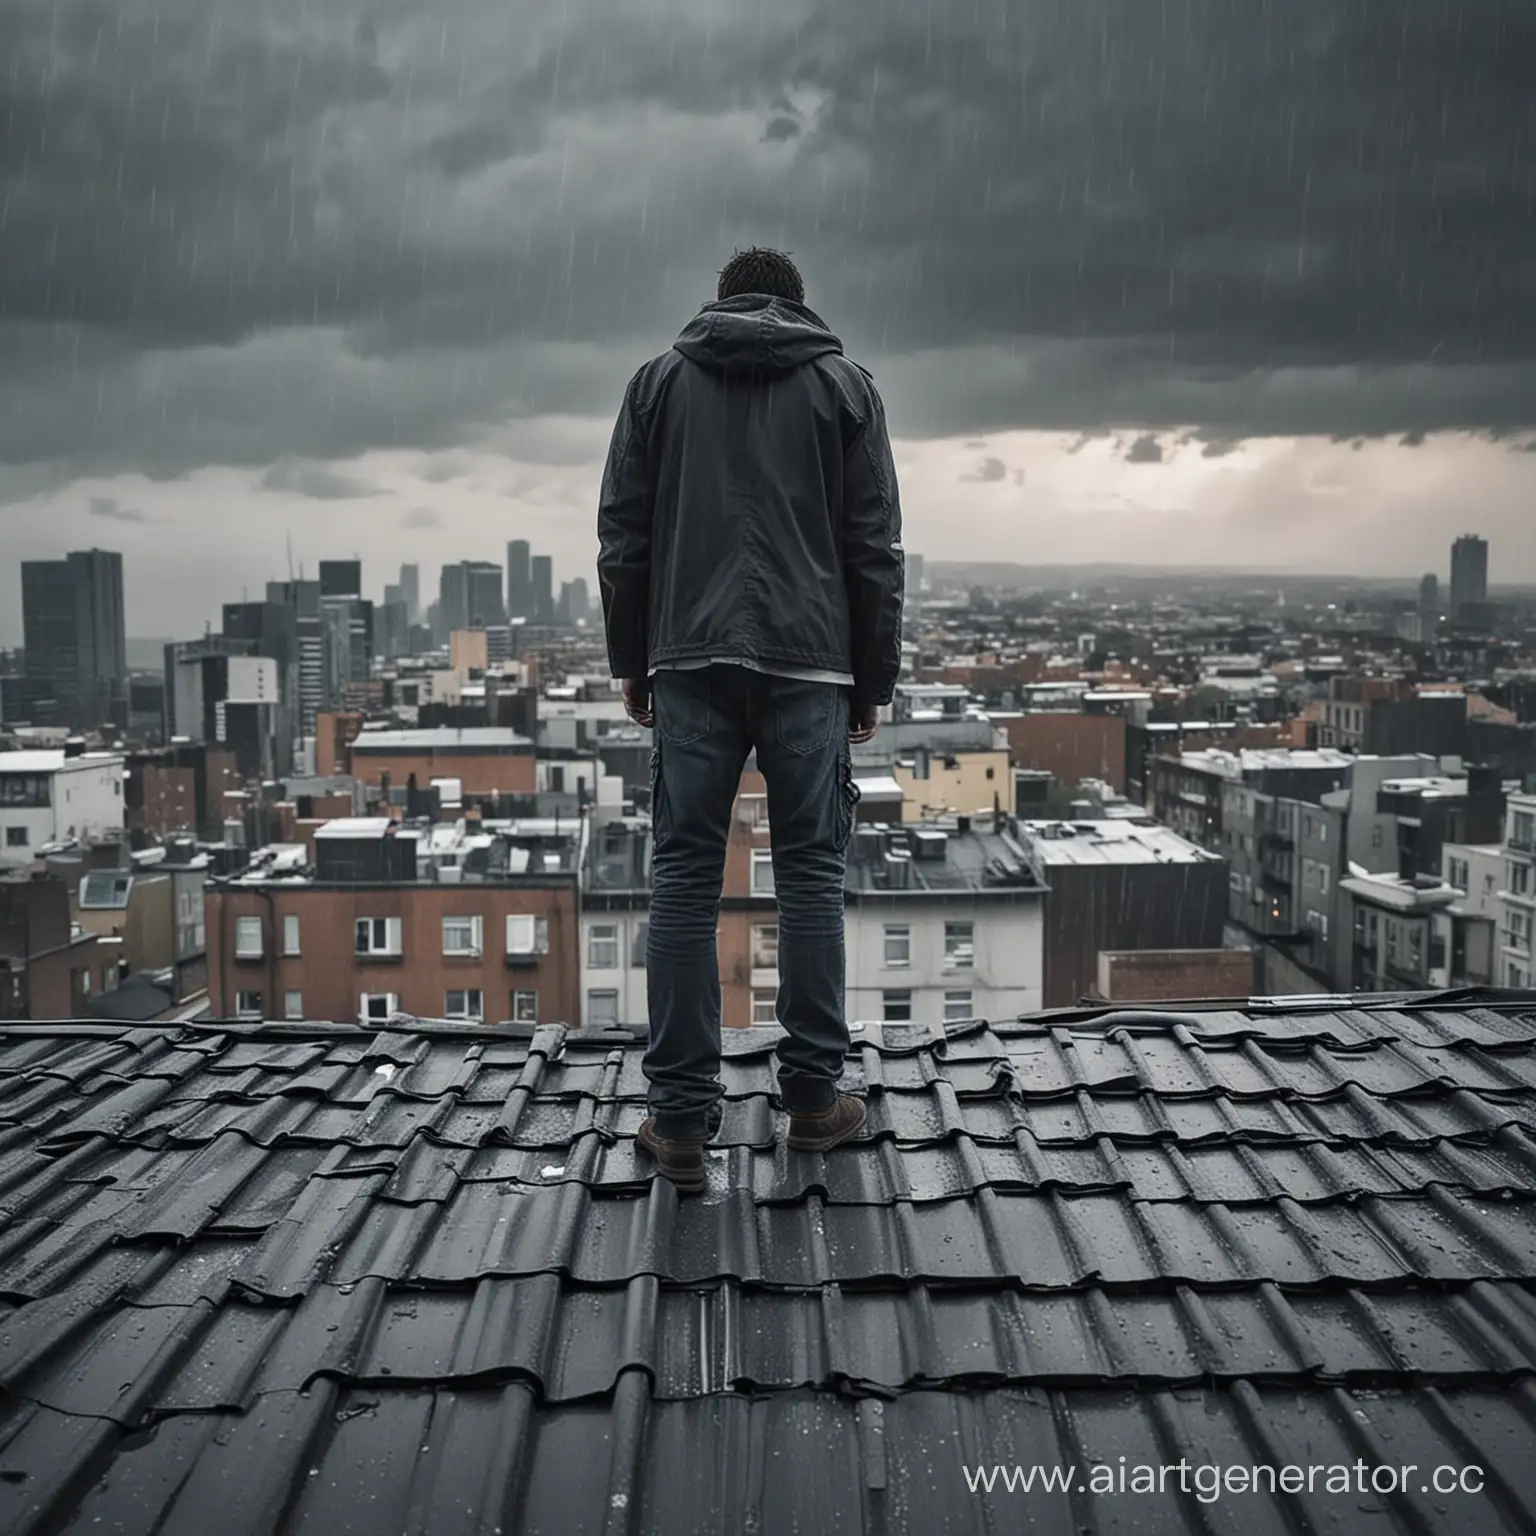 Solitary-Figure-Contemplating-on-Urban-Rooftop-with-Caring-Companion-Amidst-Dreary-Rainfall